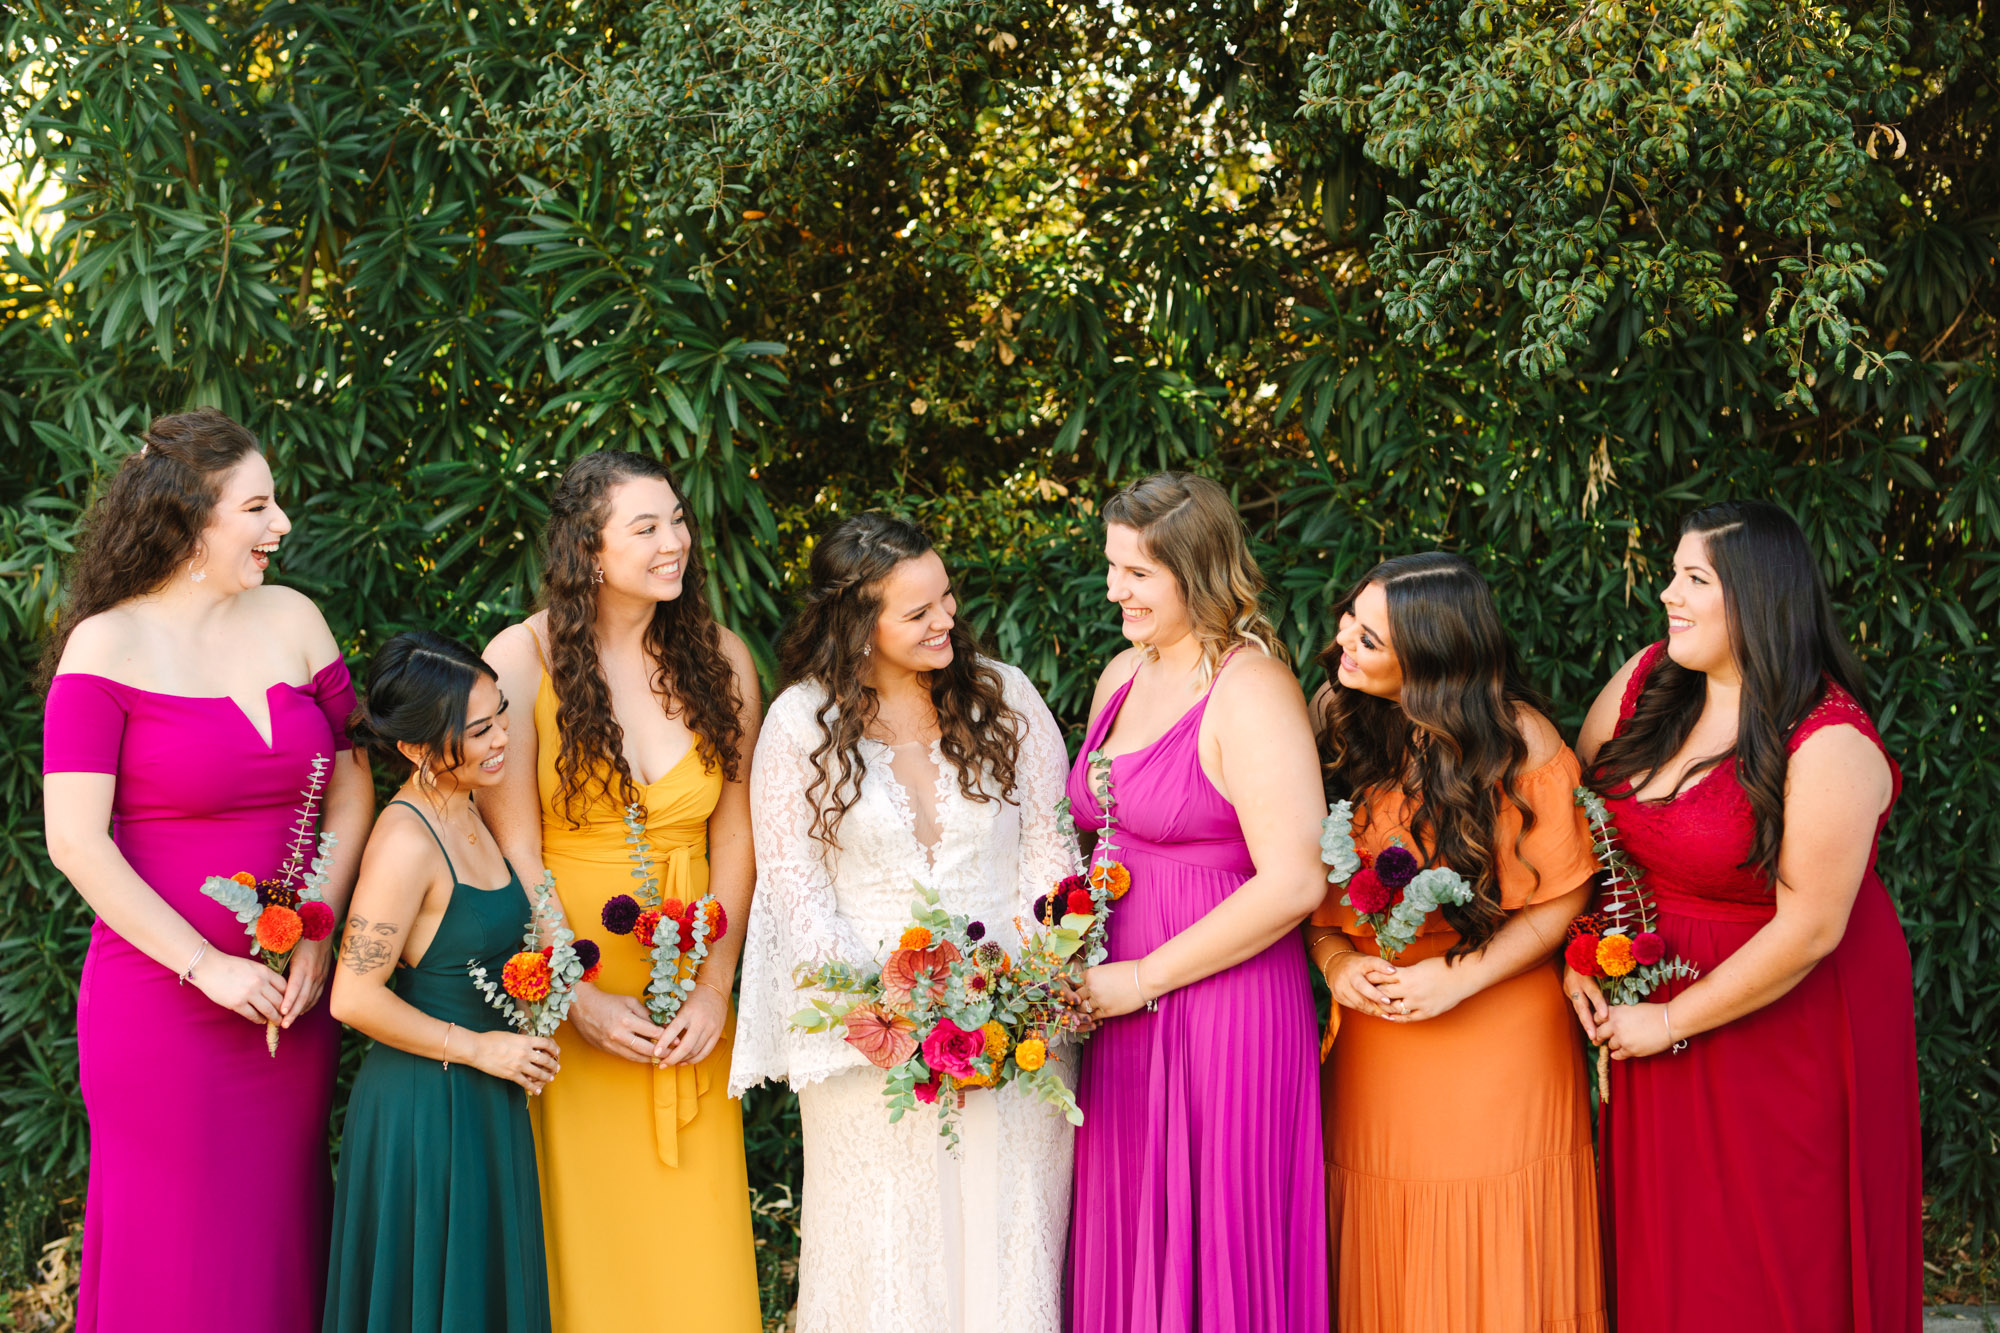 Bride and bridesmaids in colorful assorted dresses - www.marycostaweddings.com